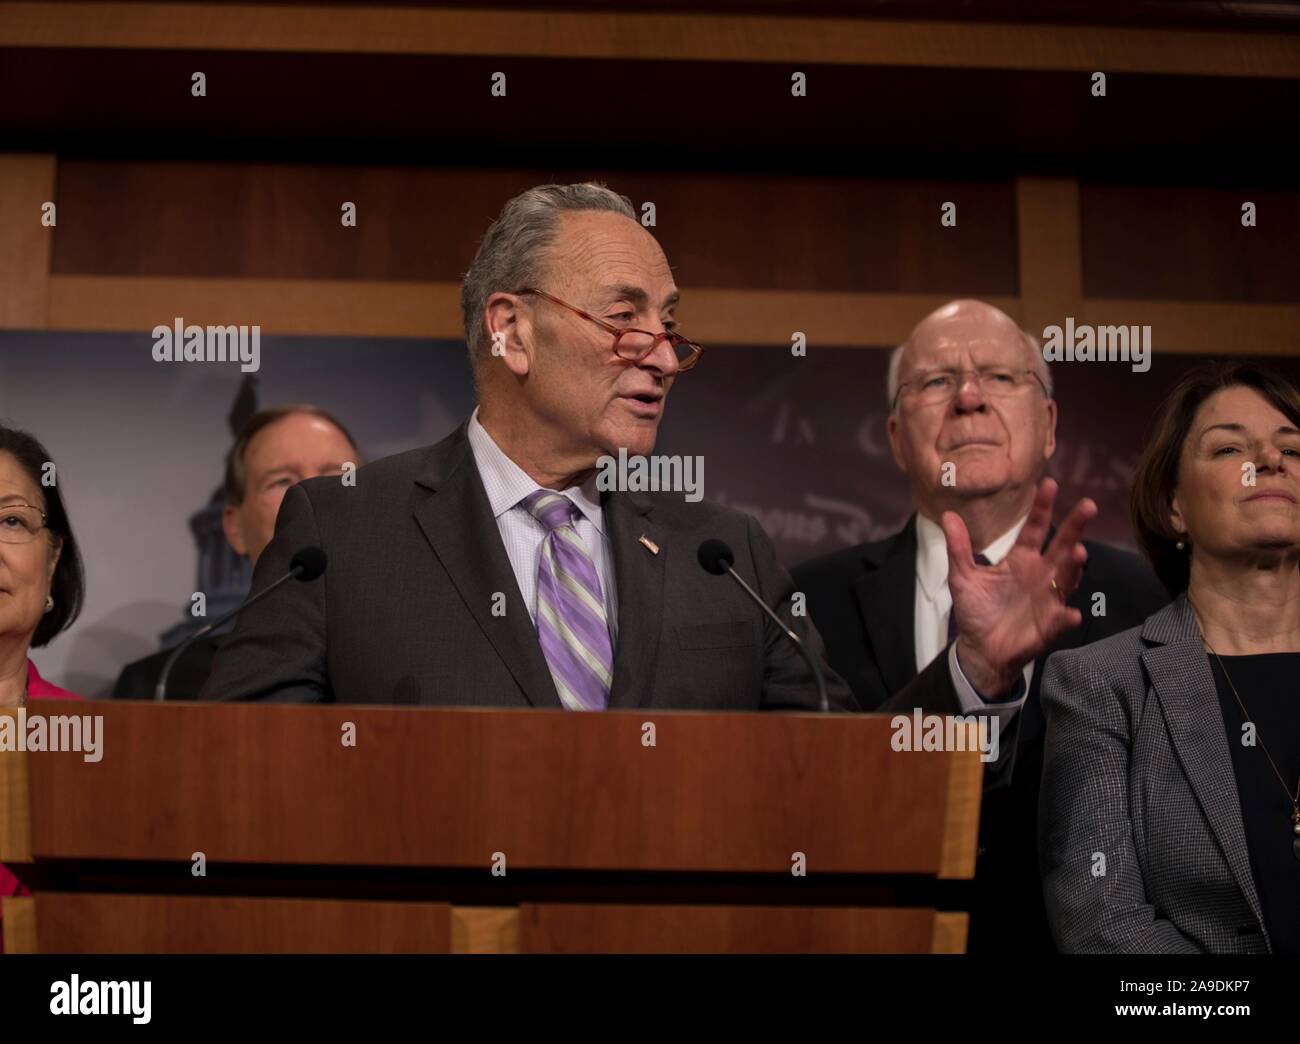 U.S. Senator Chuck Schumer of New York, joined by fellow democrats, introduced the Violence Against Women Reauthorization Act of 2019 during a press conference on Capitol Hill November 13, 2019 in Washington, DC. Stock Photo